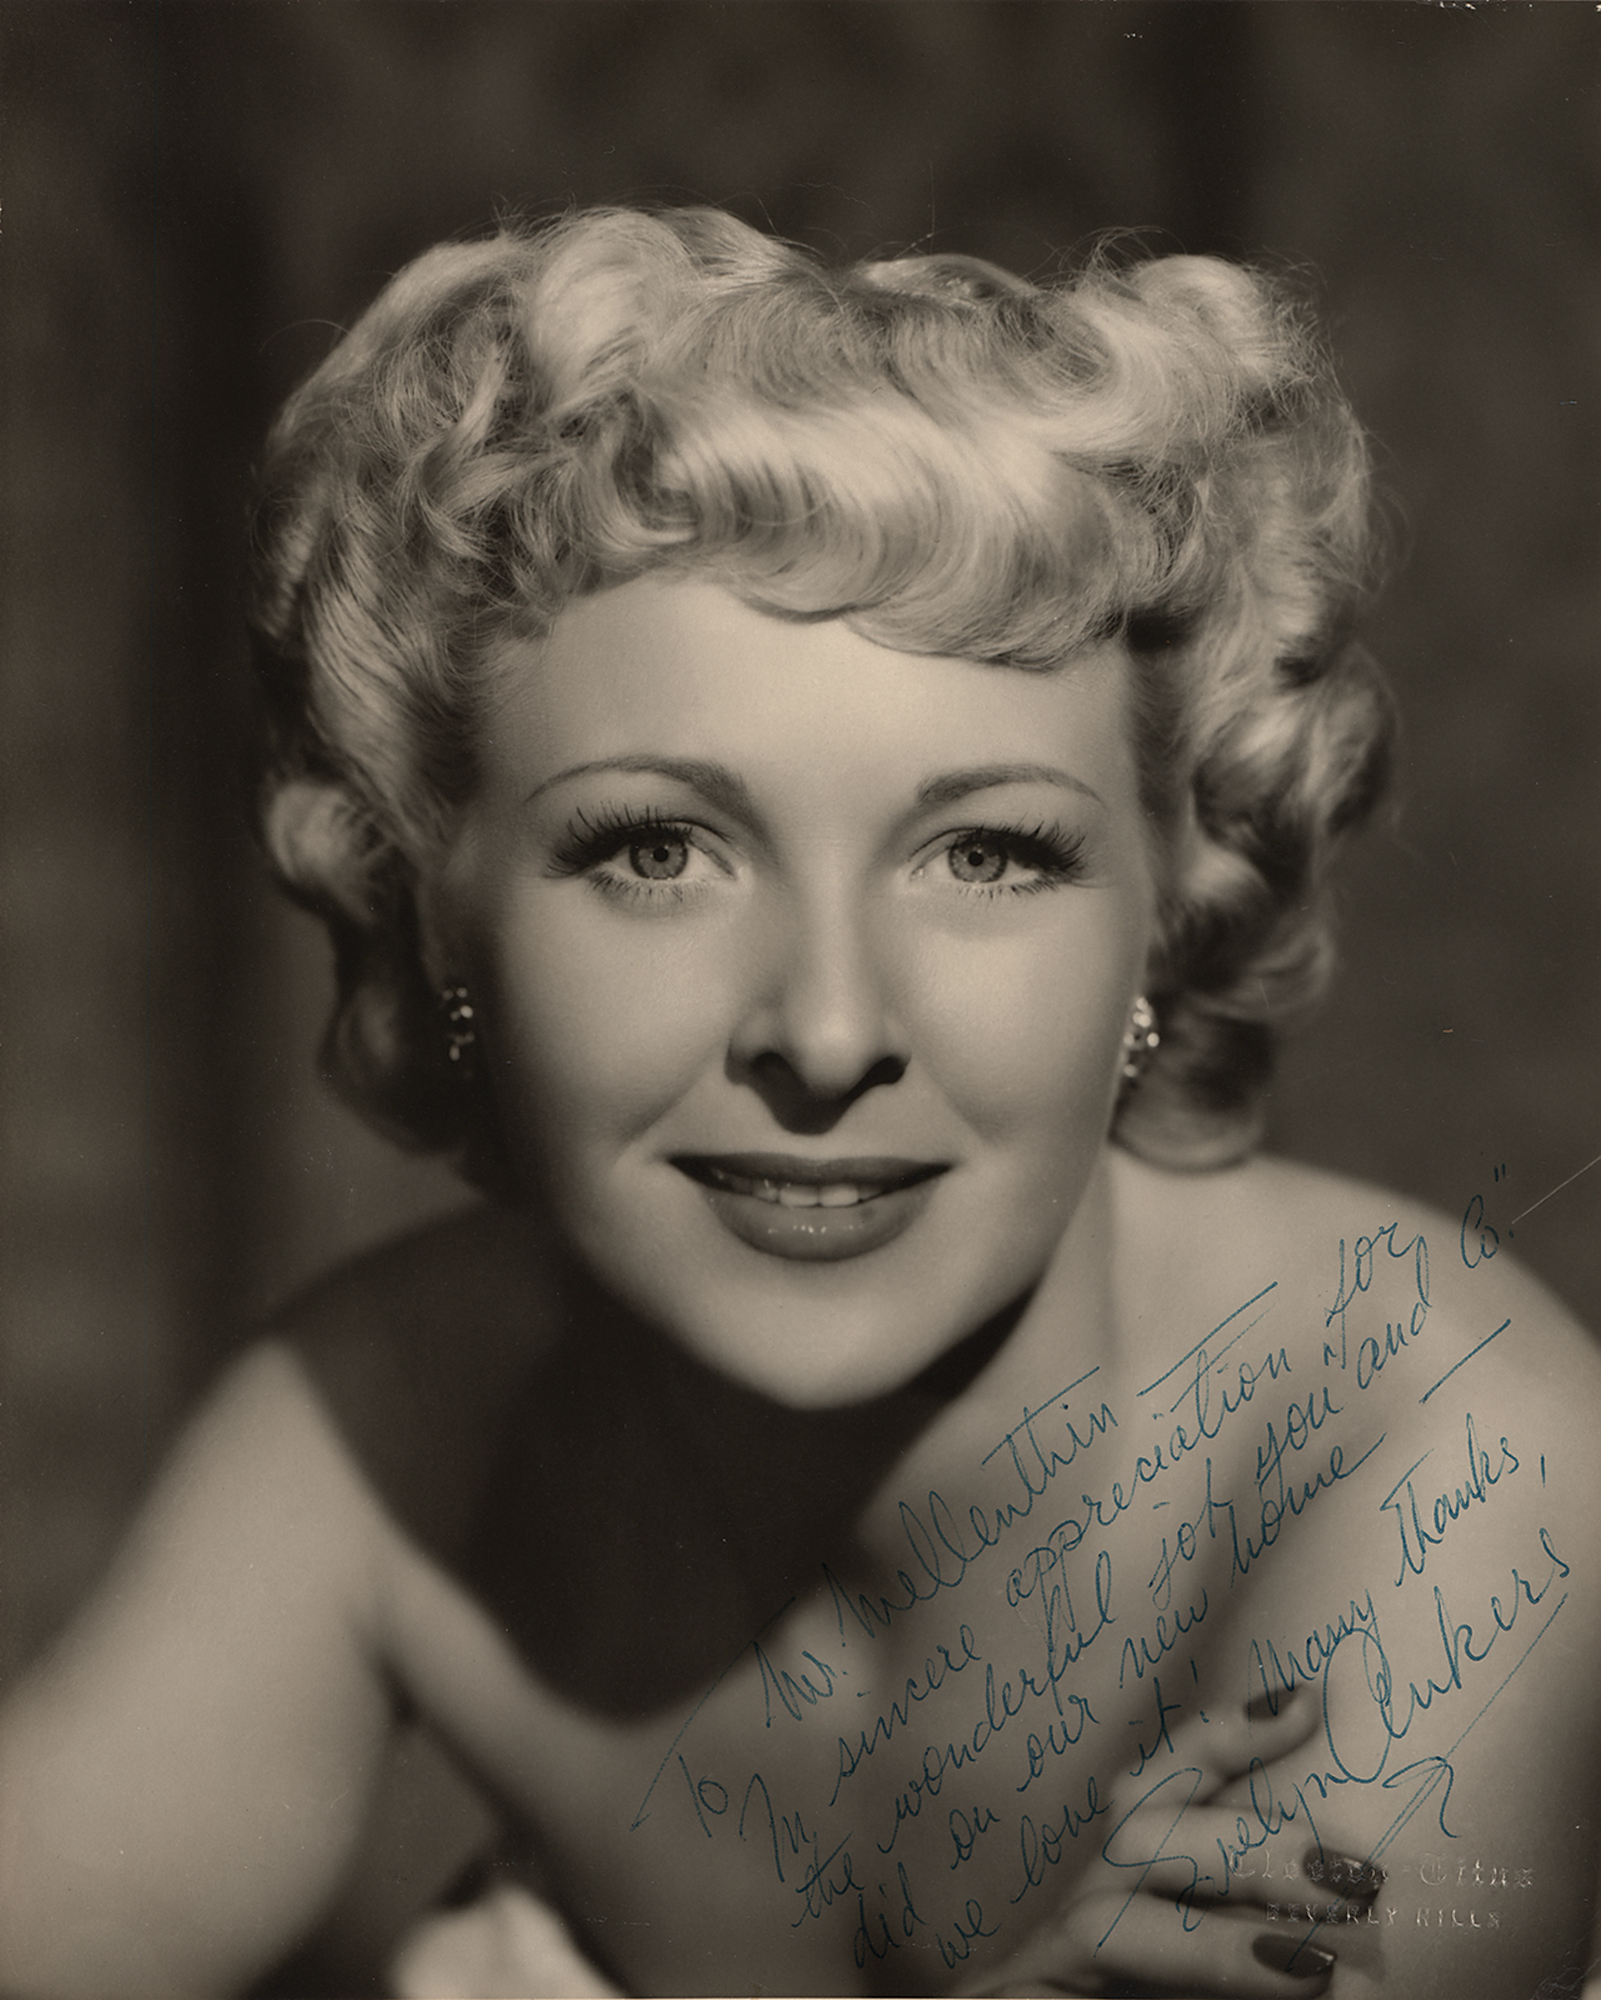 Lot #694 Evelyn Ankers Signed Photograph